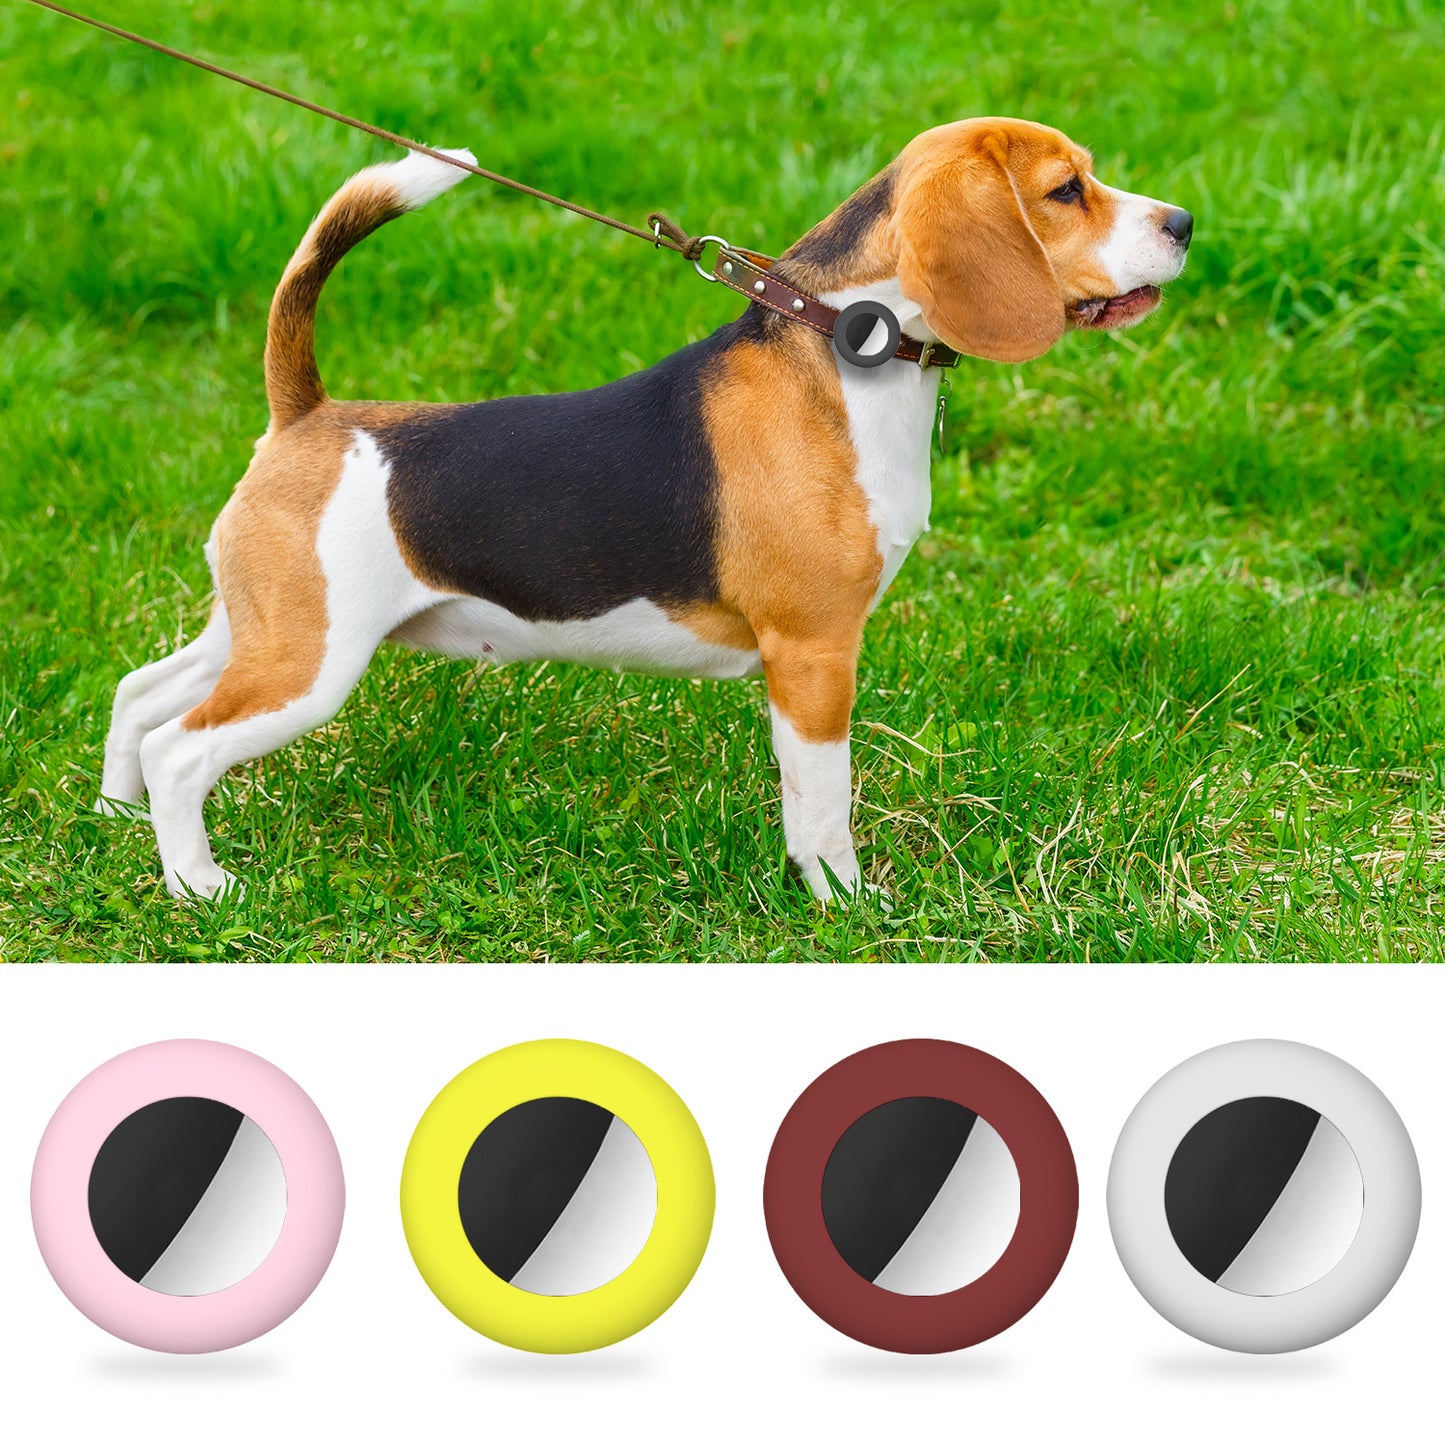 Airtag Case | INSNIC Creative Pet Type Silicone Soft Shell To Prevent Loss